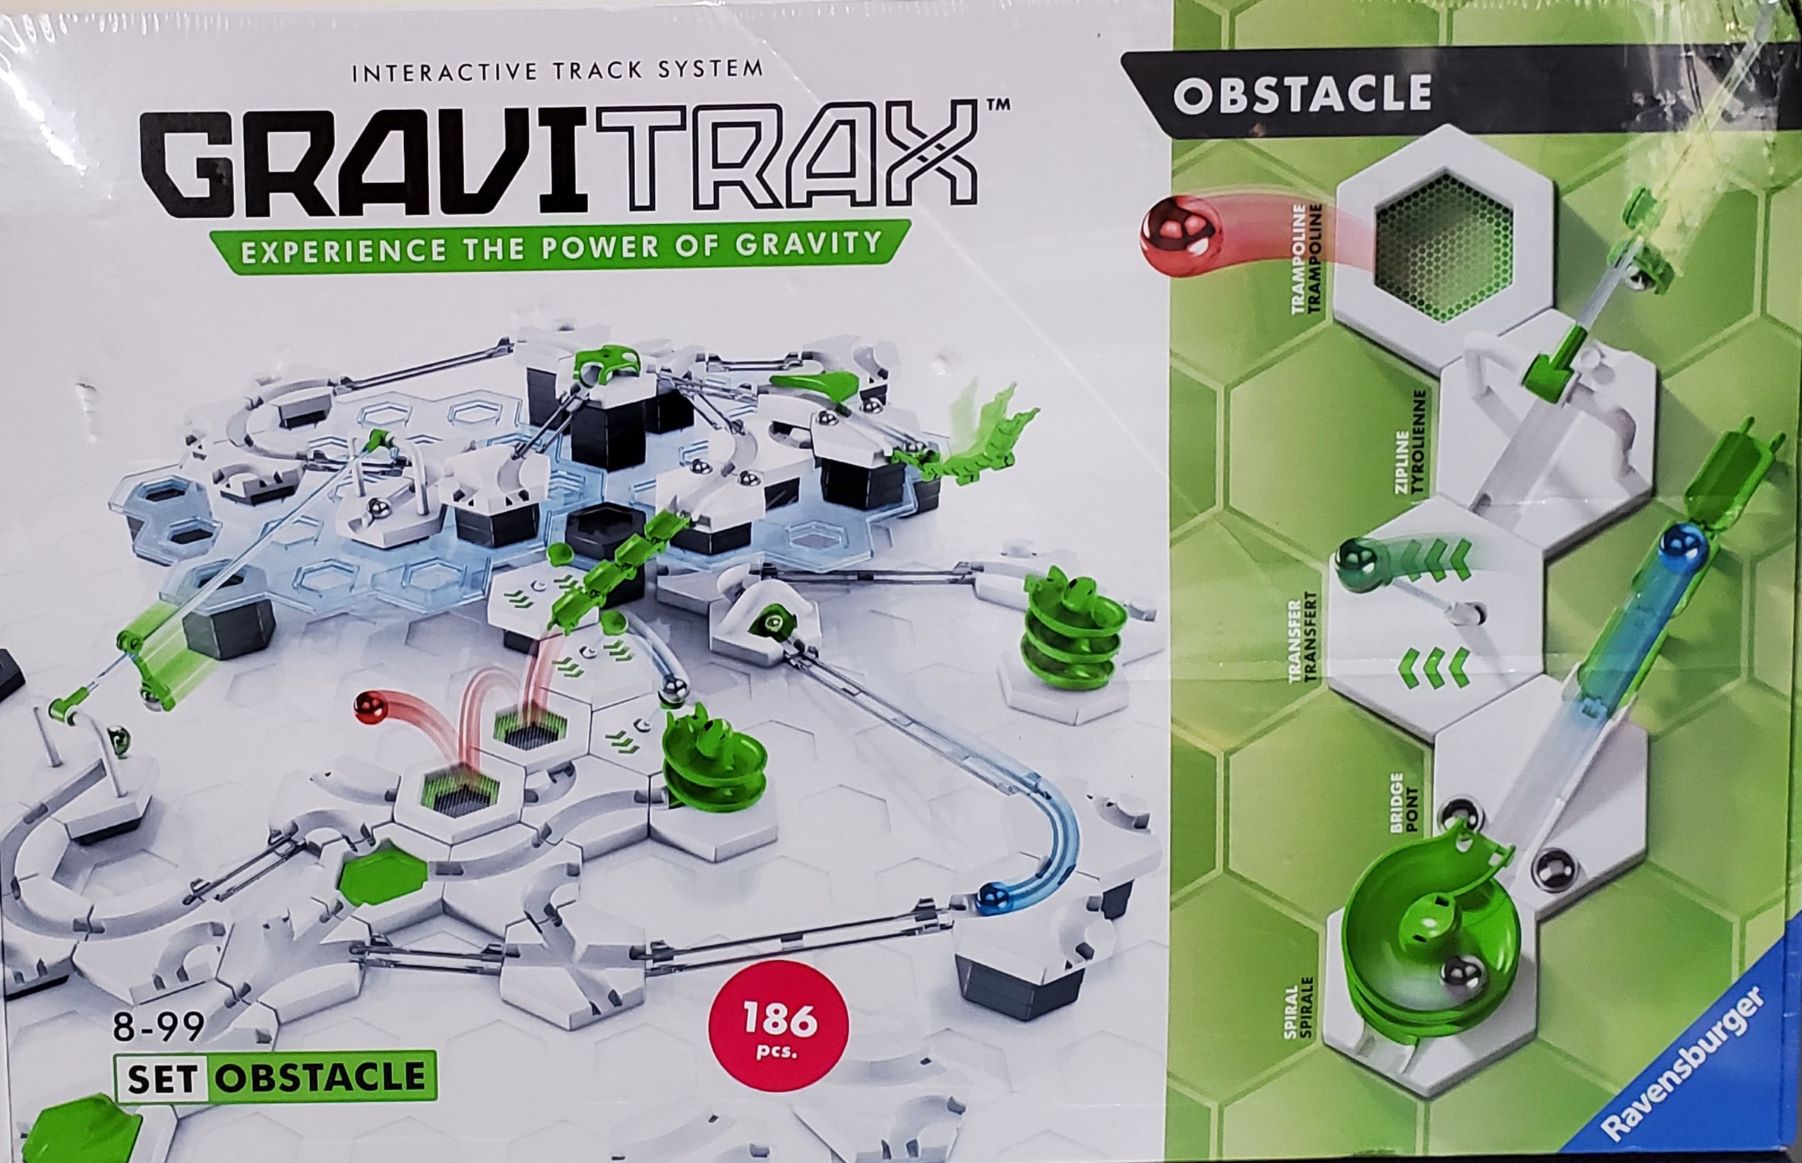 Set Obstacle Ravensburger The Collections Gravitrax Puzzle Course –